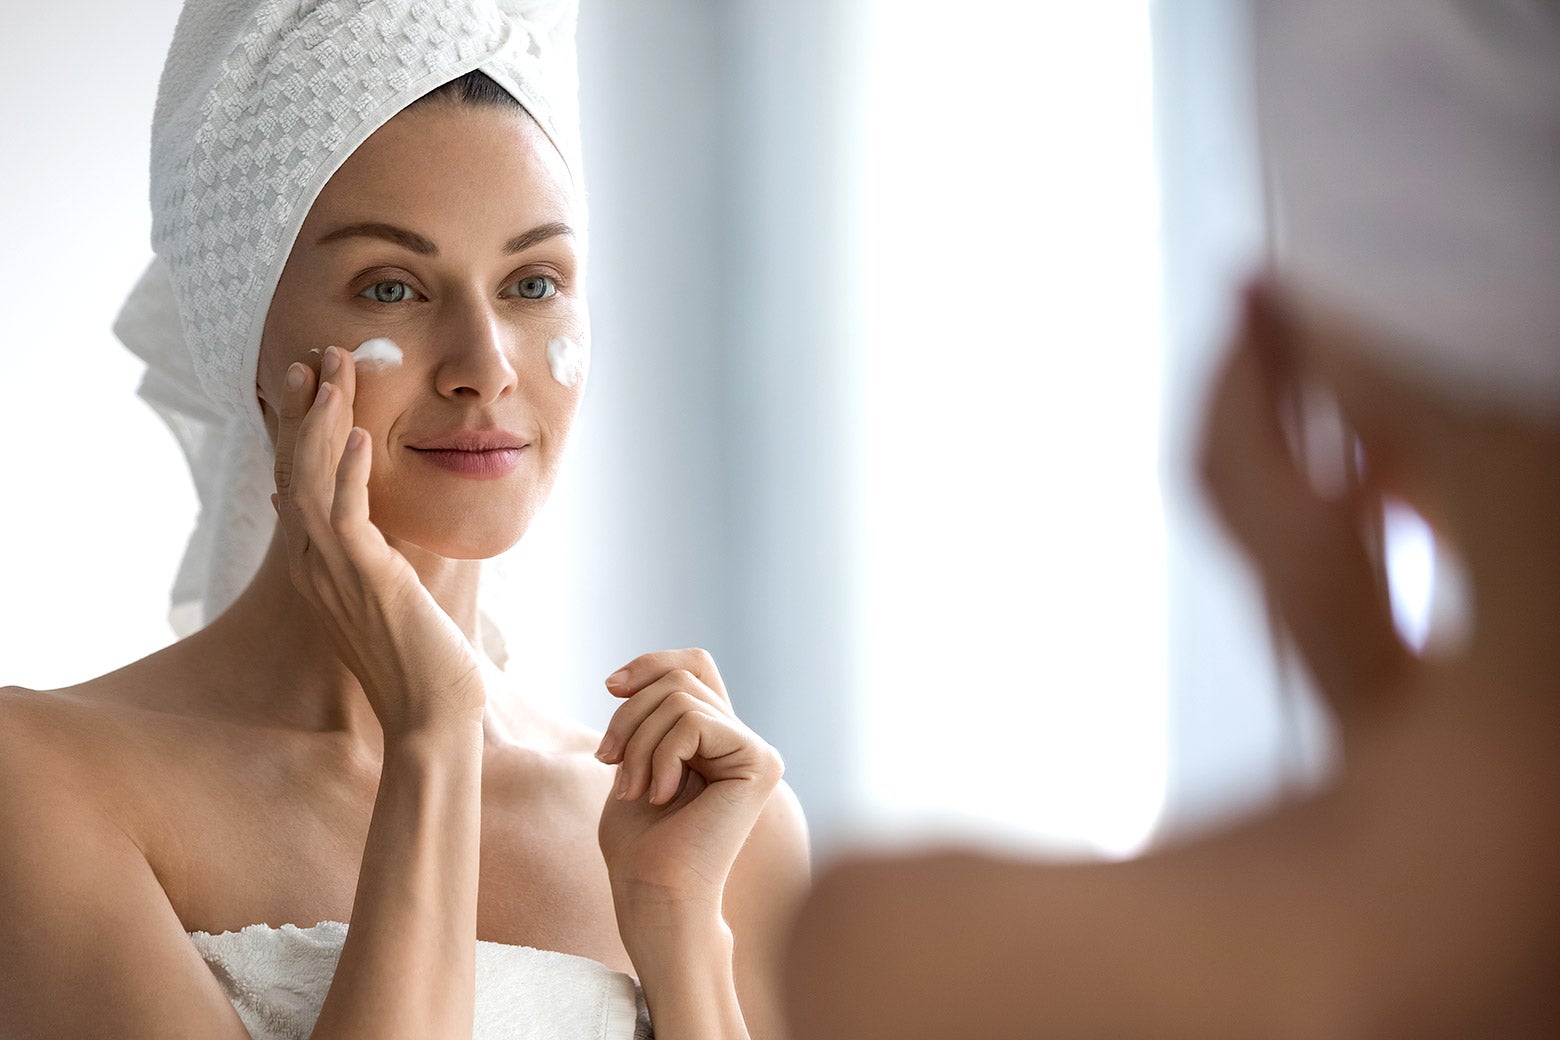 Dermatologist-Recommended Skin Care Routine for Your 20s